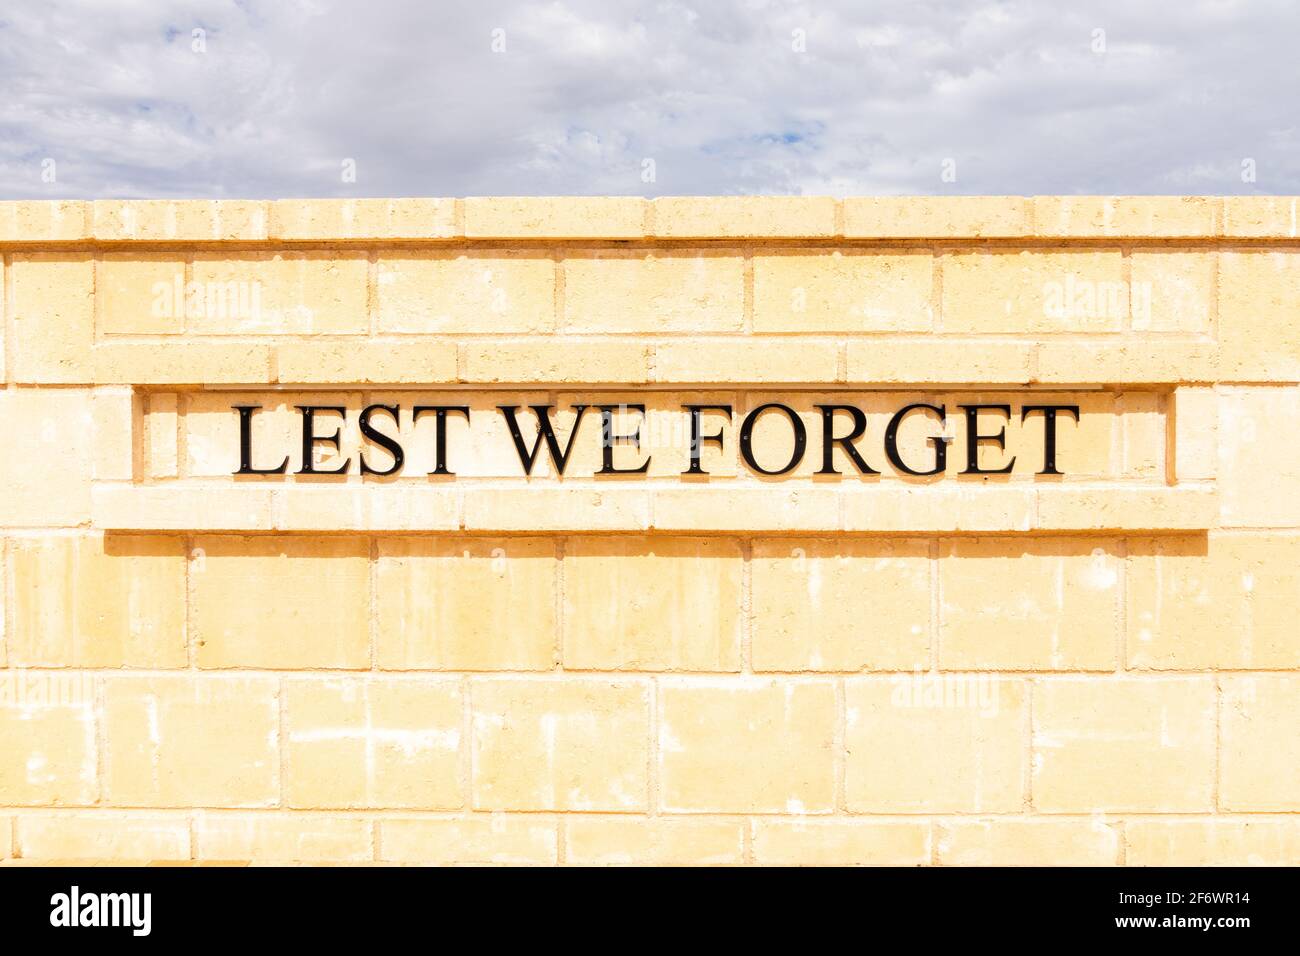 Lest We Forget Memorial Wall Dumbelyung Western Australia Stock Photo